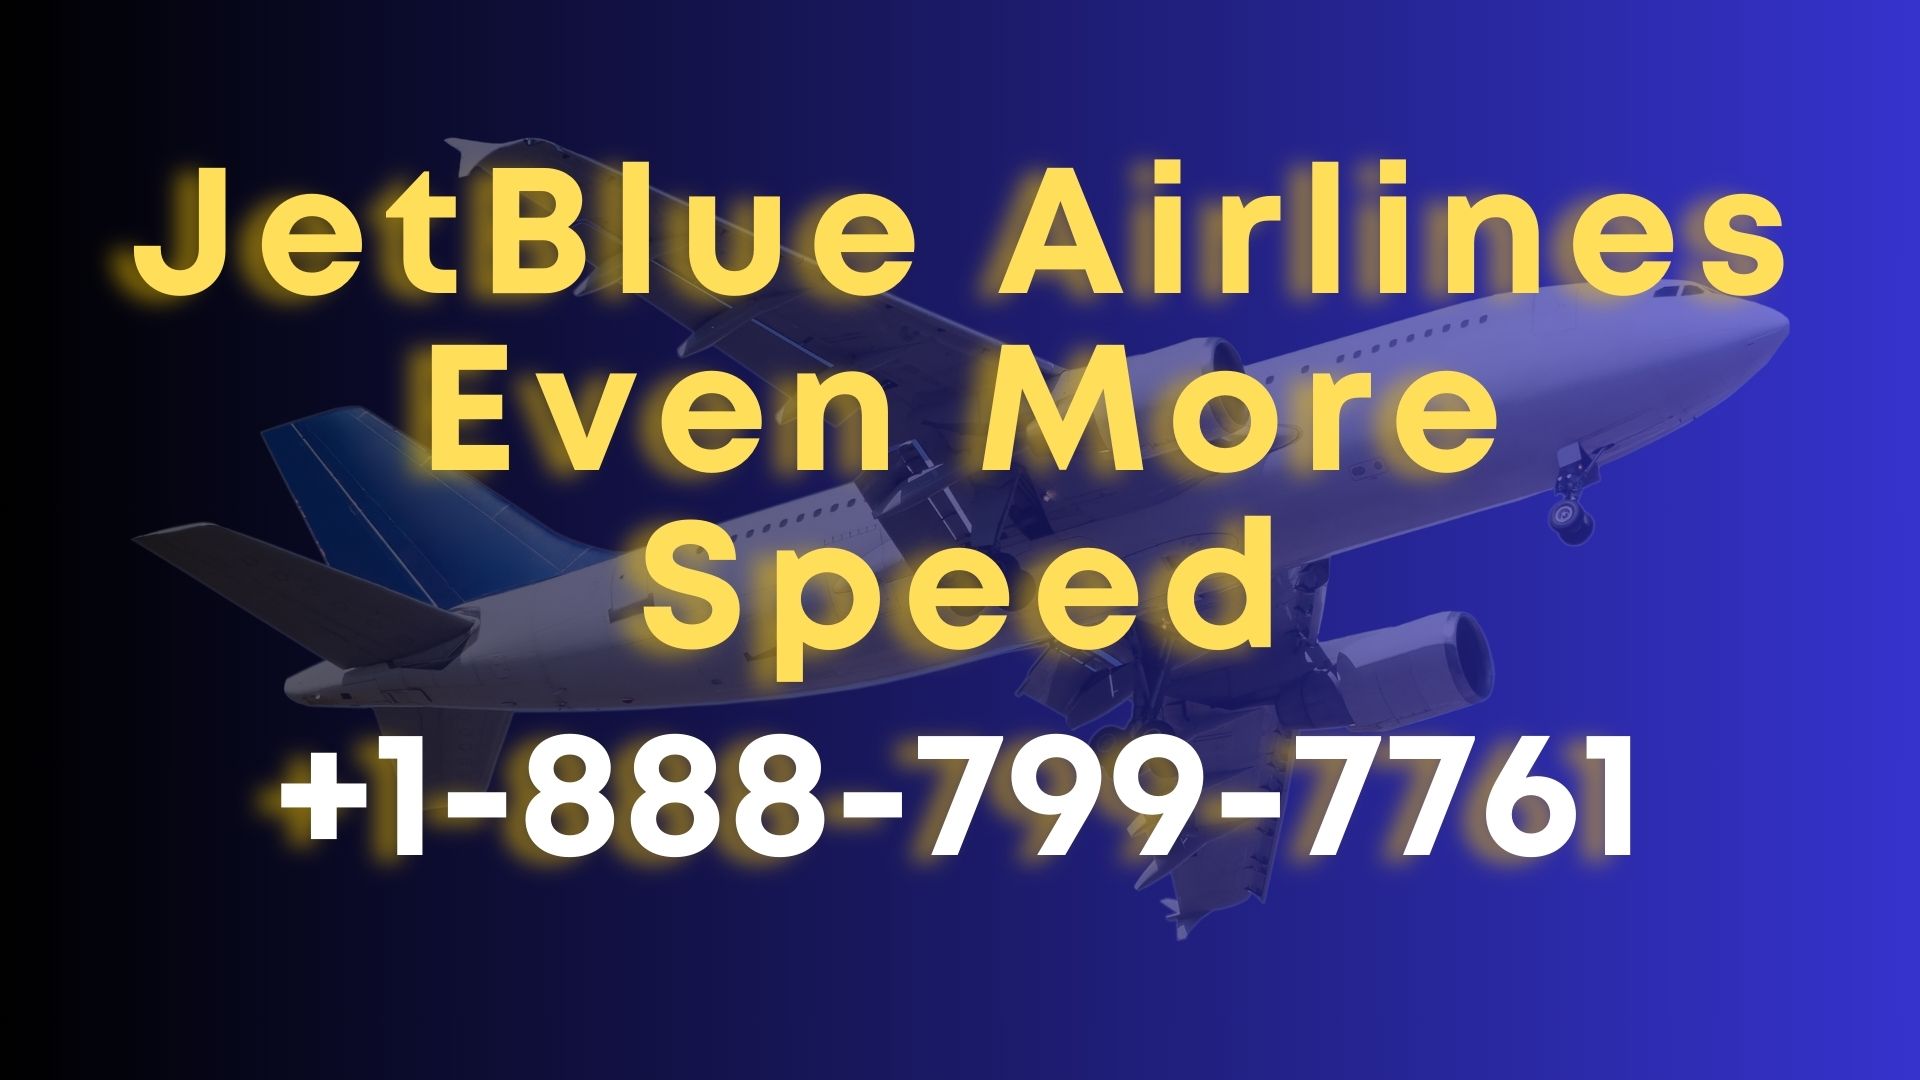 JetBlue Airlines Even More Speed